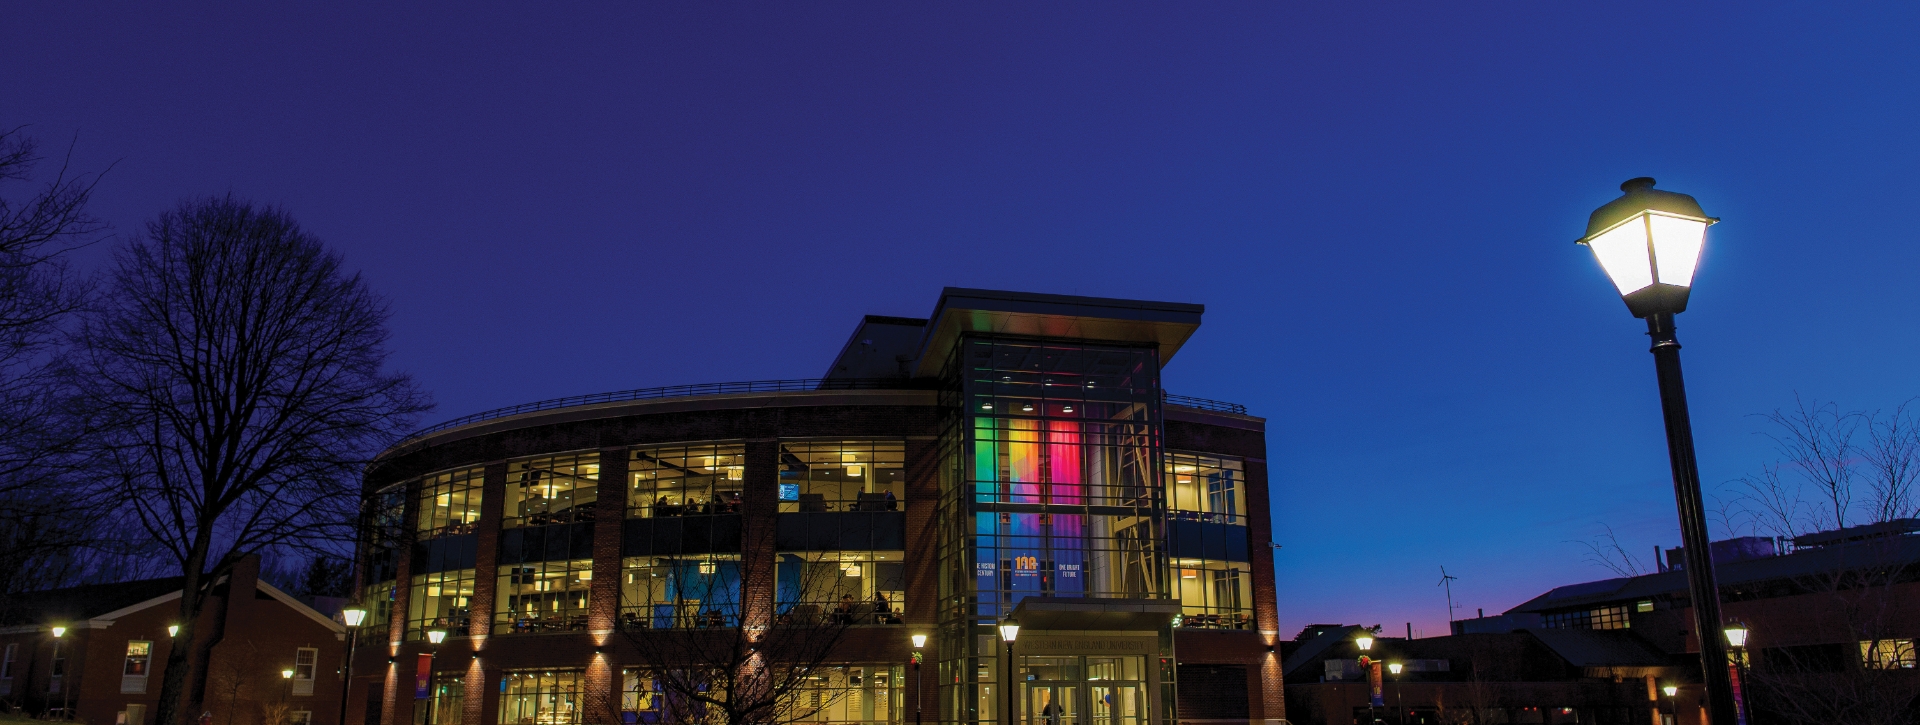 Nighttime view of University Commons with colorful centennial banners